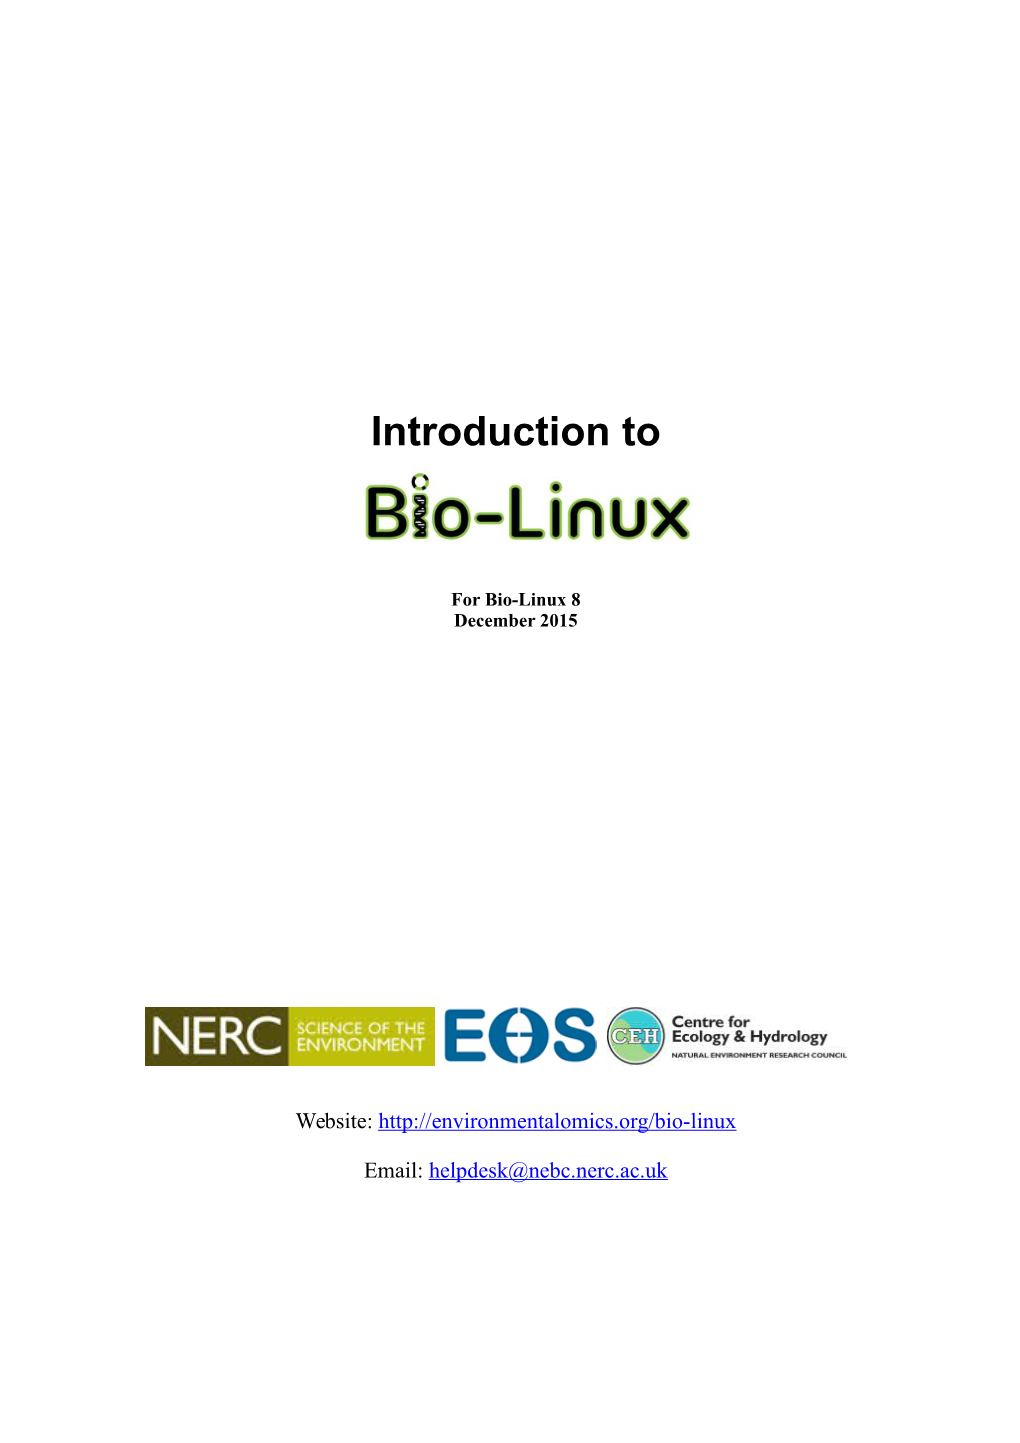 Introduction to Bio-Linux 6